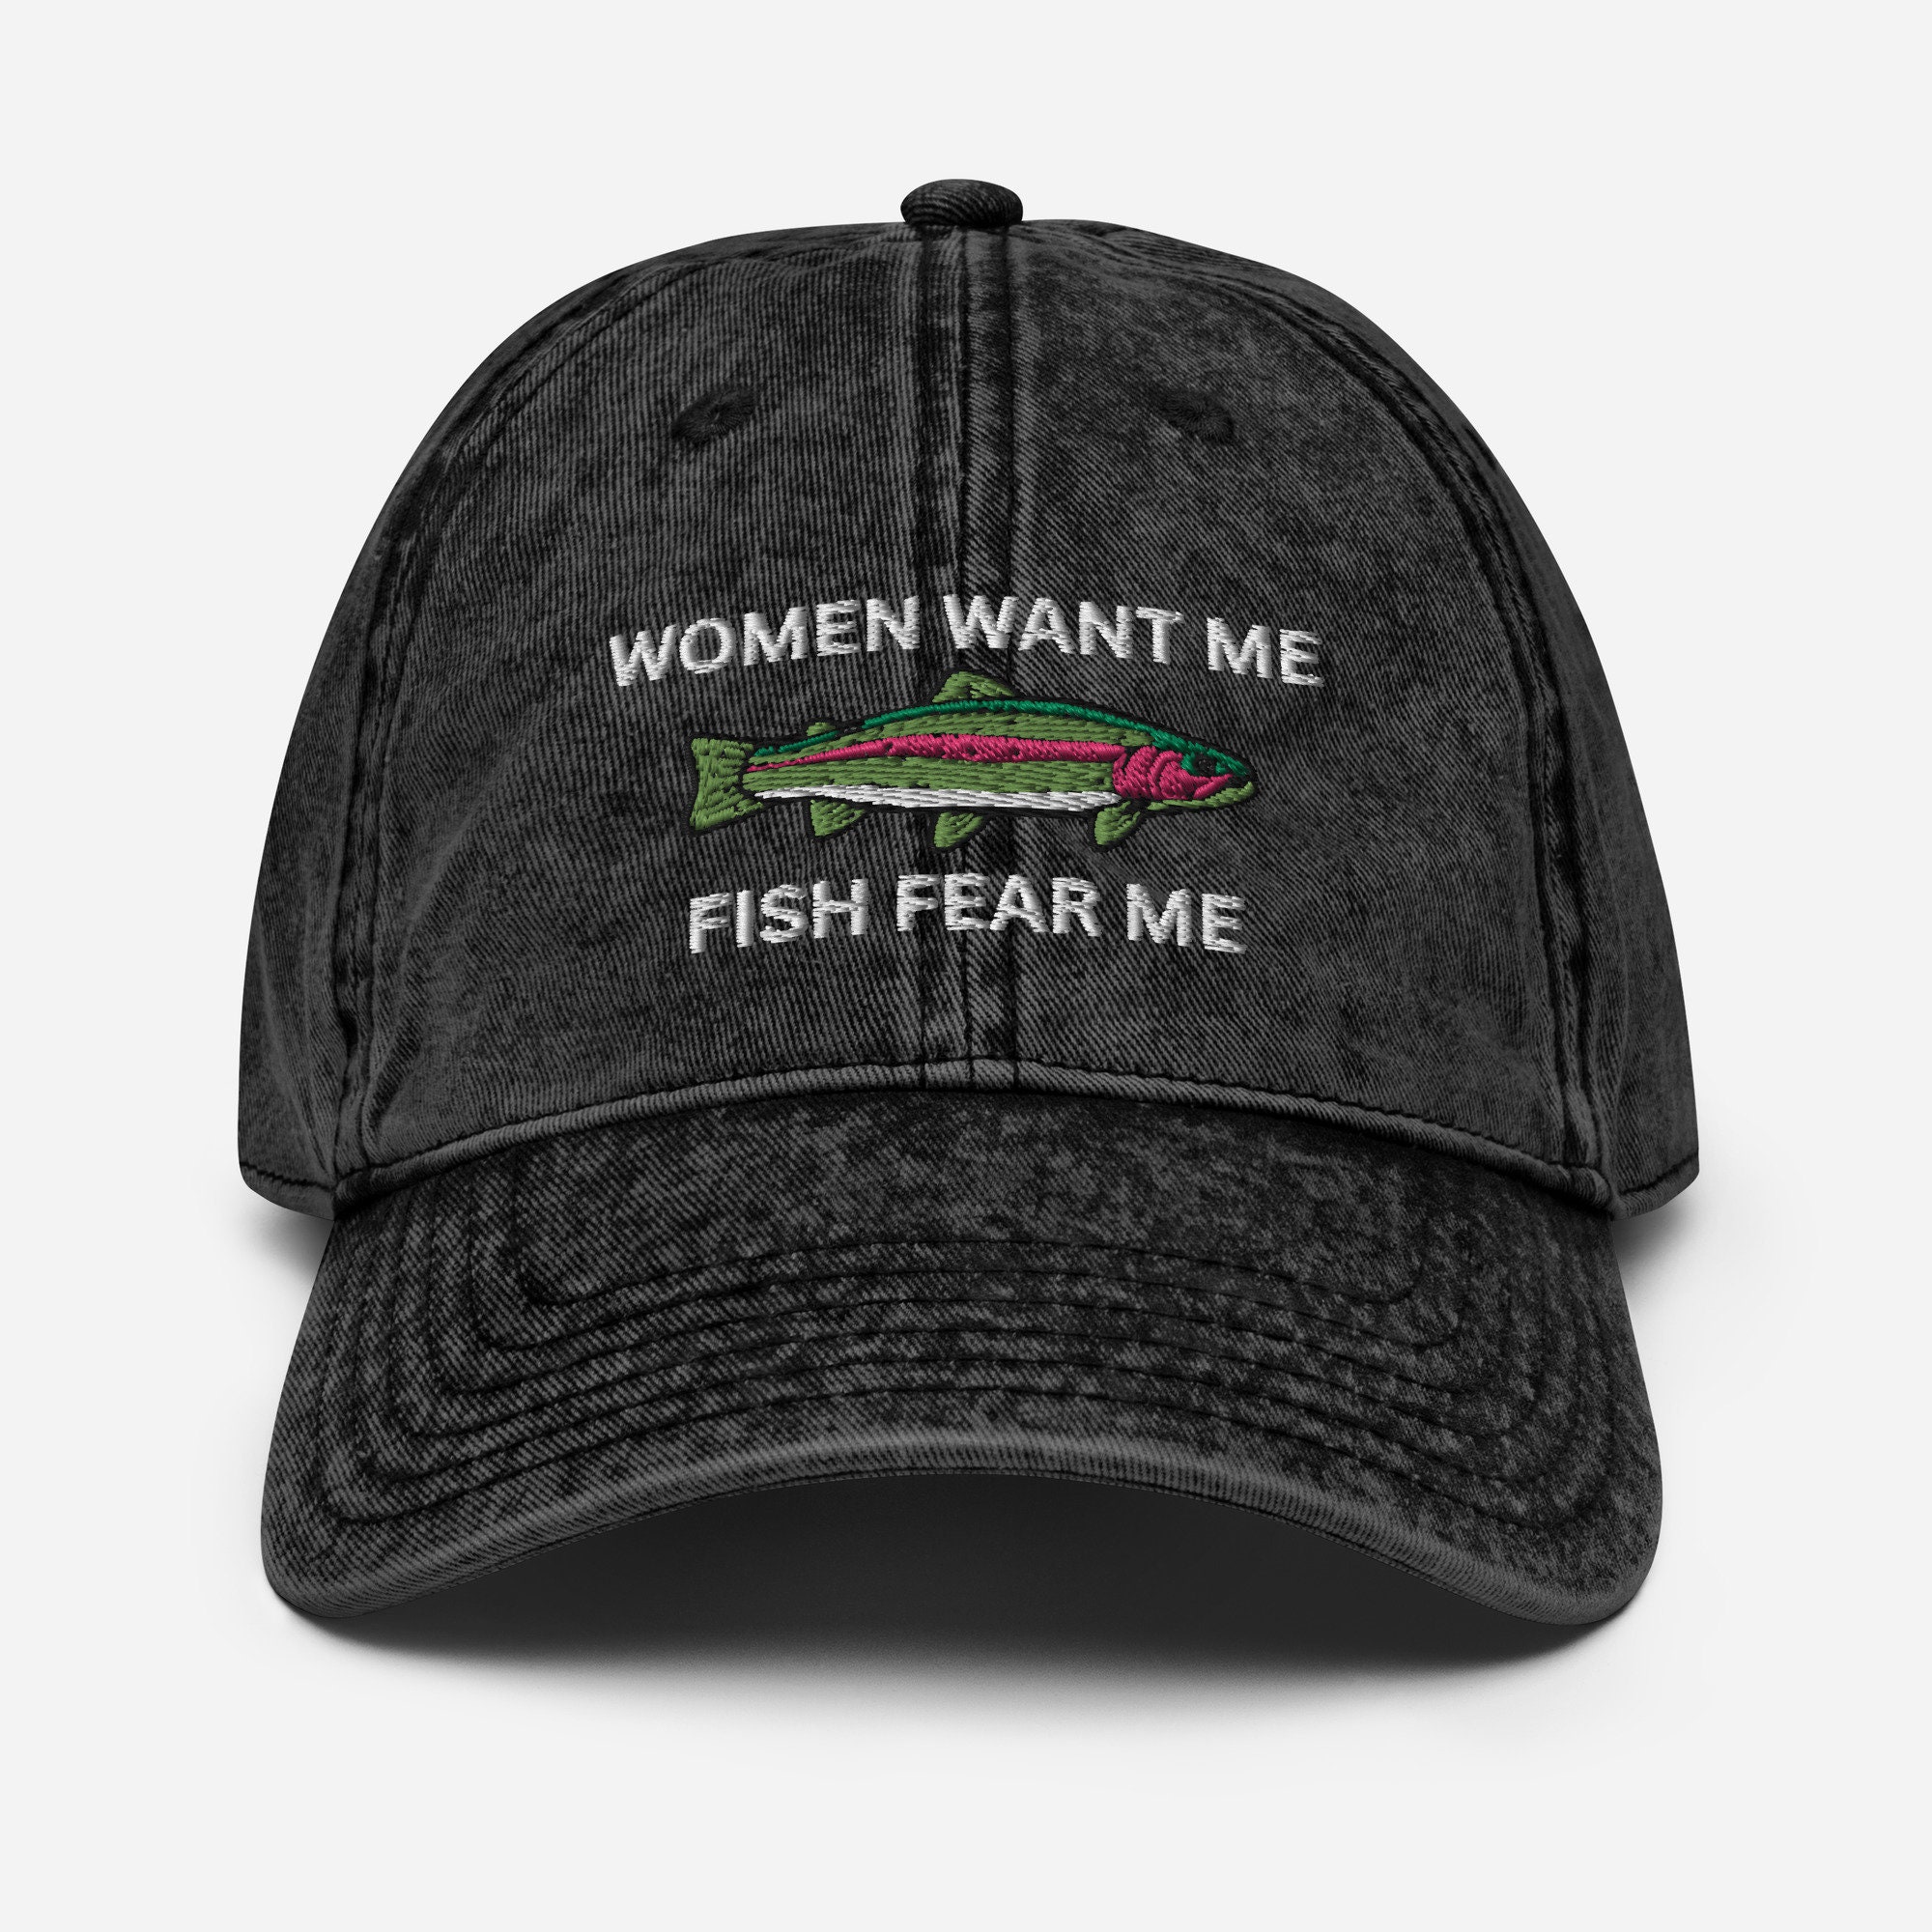 Women Want Me Fish Fear Me Funny Fisherman Hat for Summer